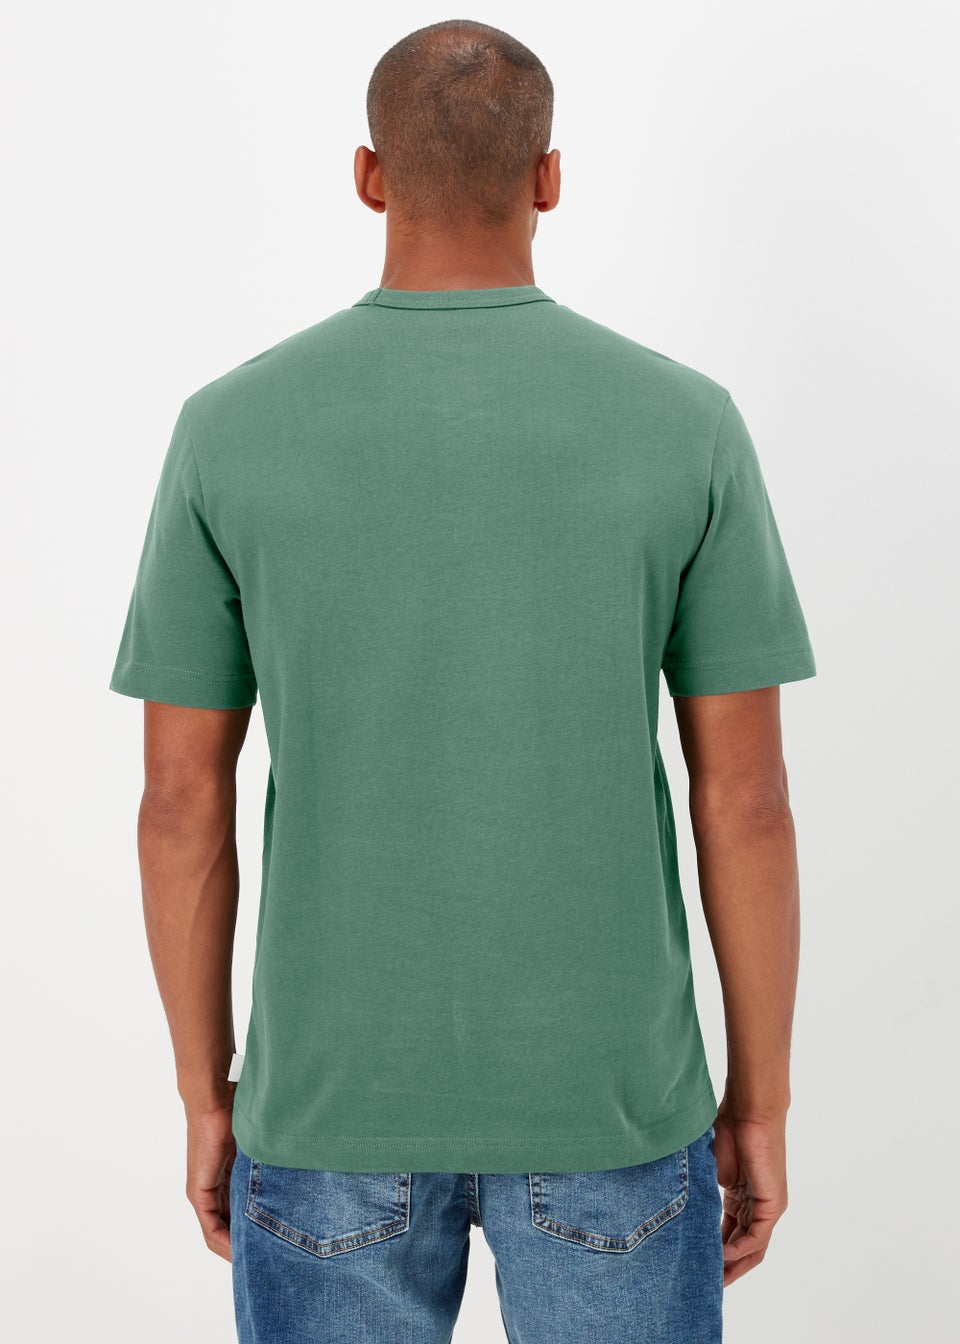 Green Michigan State Embroidered T-Shirt